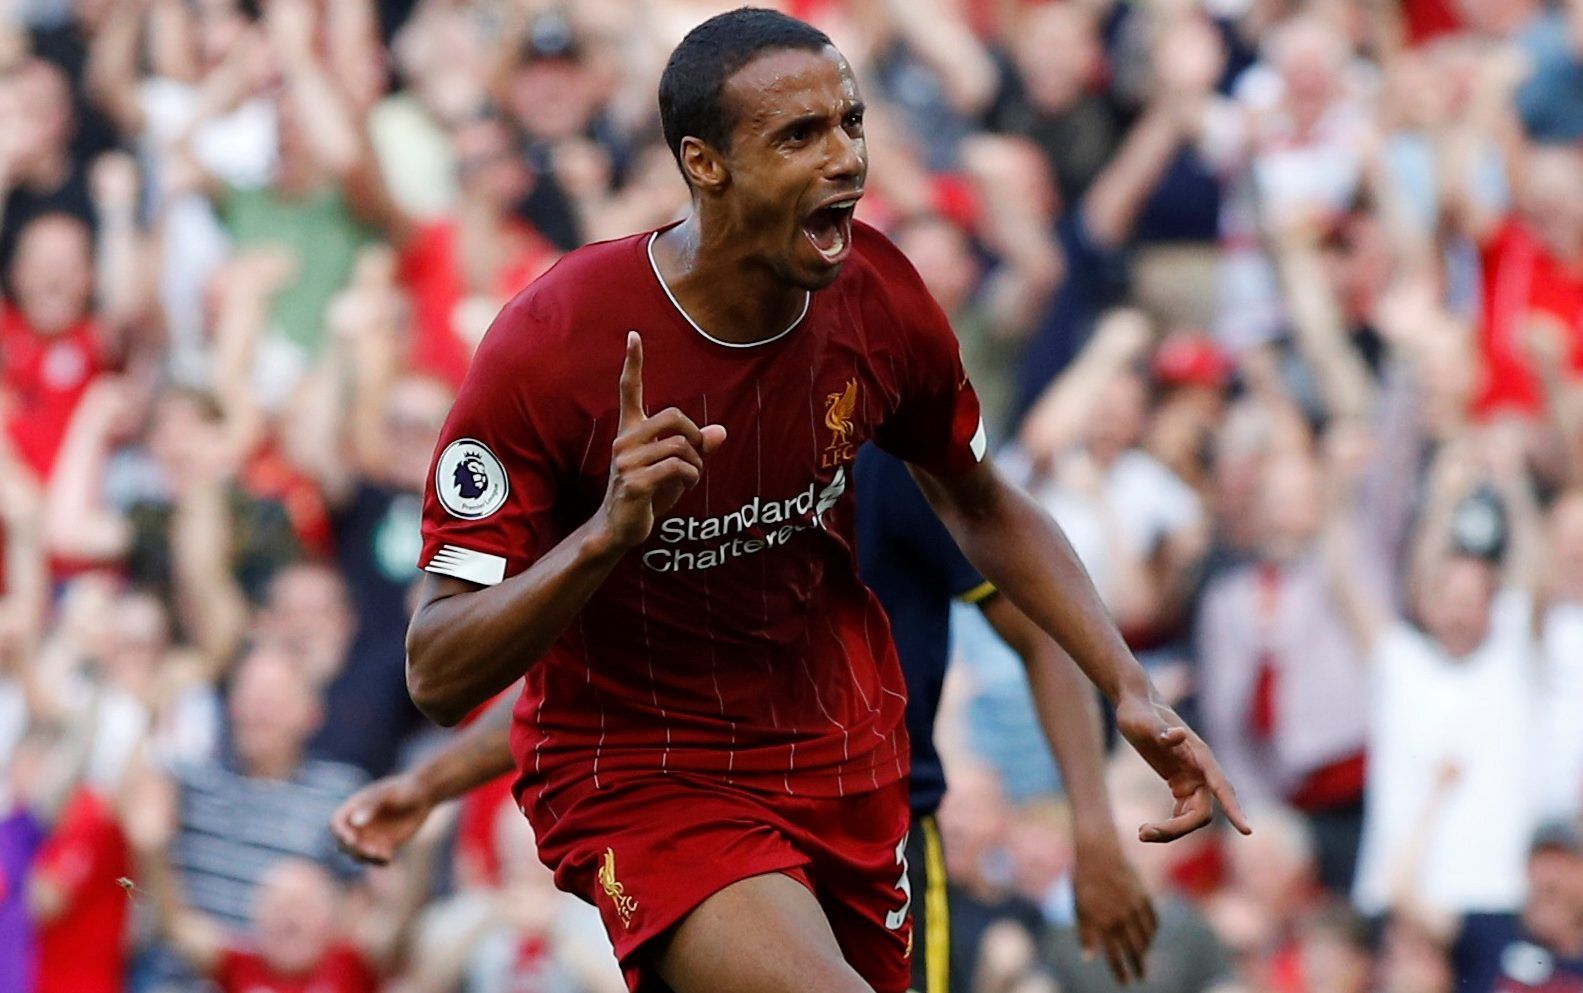 Soccer Football - Premier League - Liverpool v Arsenal - Anfield, Liverpool, Britain - August 24, 2019  Liverpool's Joel Matip celebrates scoring their first goal   REUTERS/Phil Noble  EDITORIAL USE ONLY. No use with unauthorized audio, video, data, fixture lists, club/league logos or 